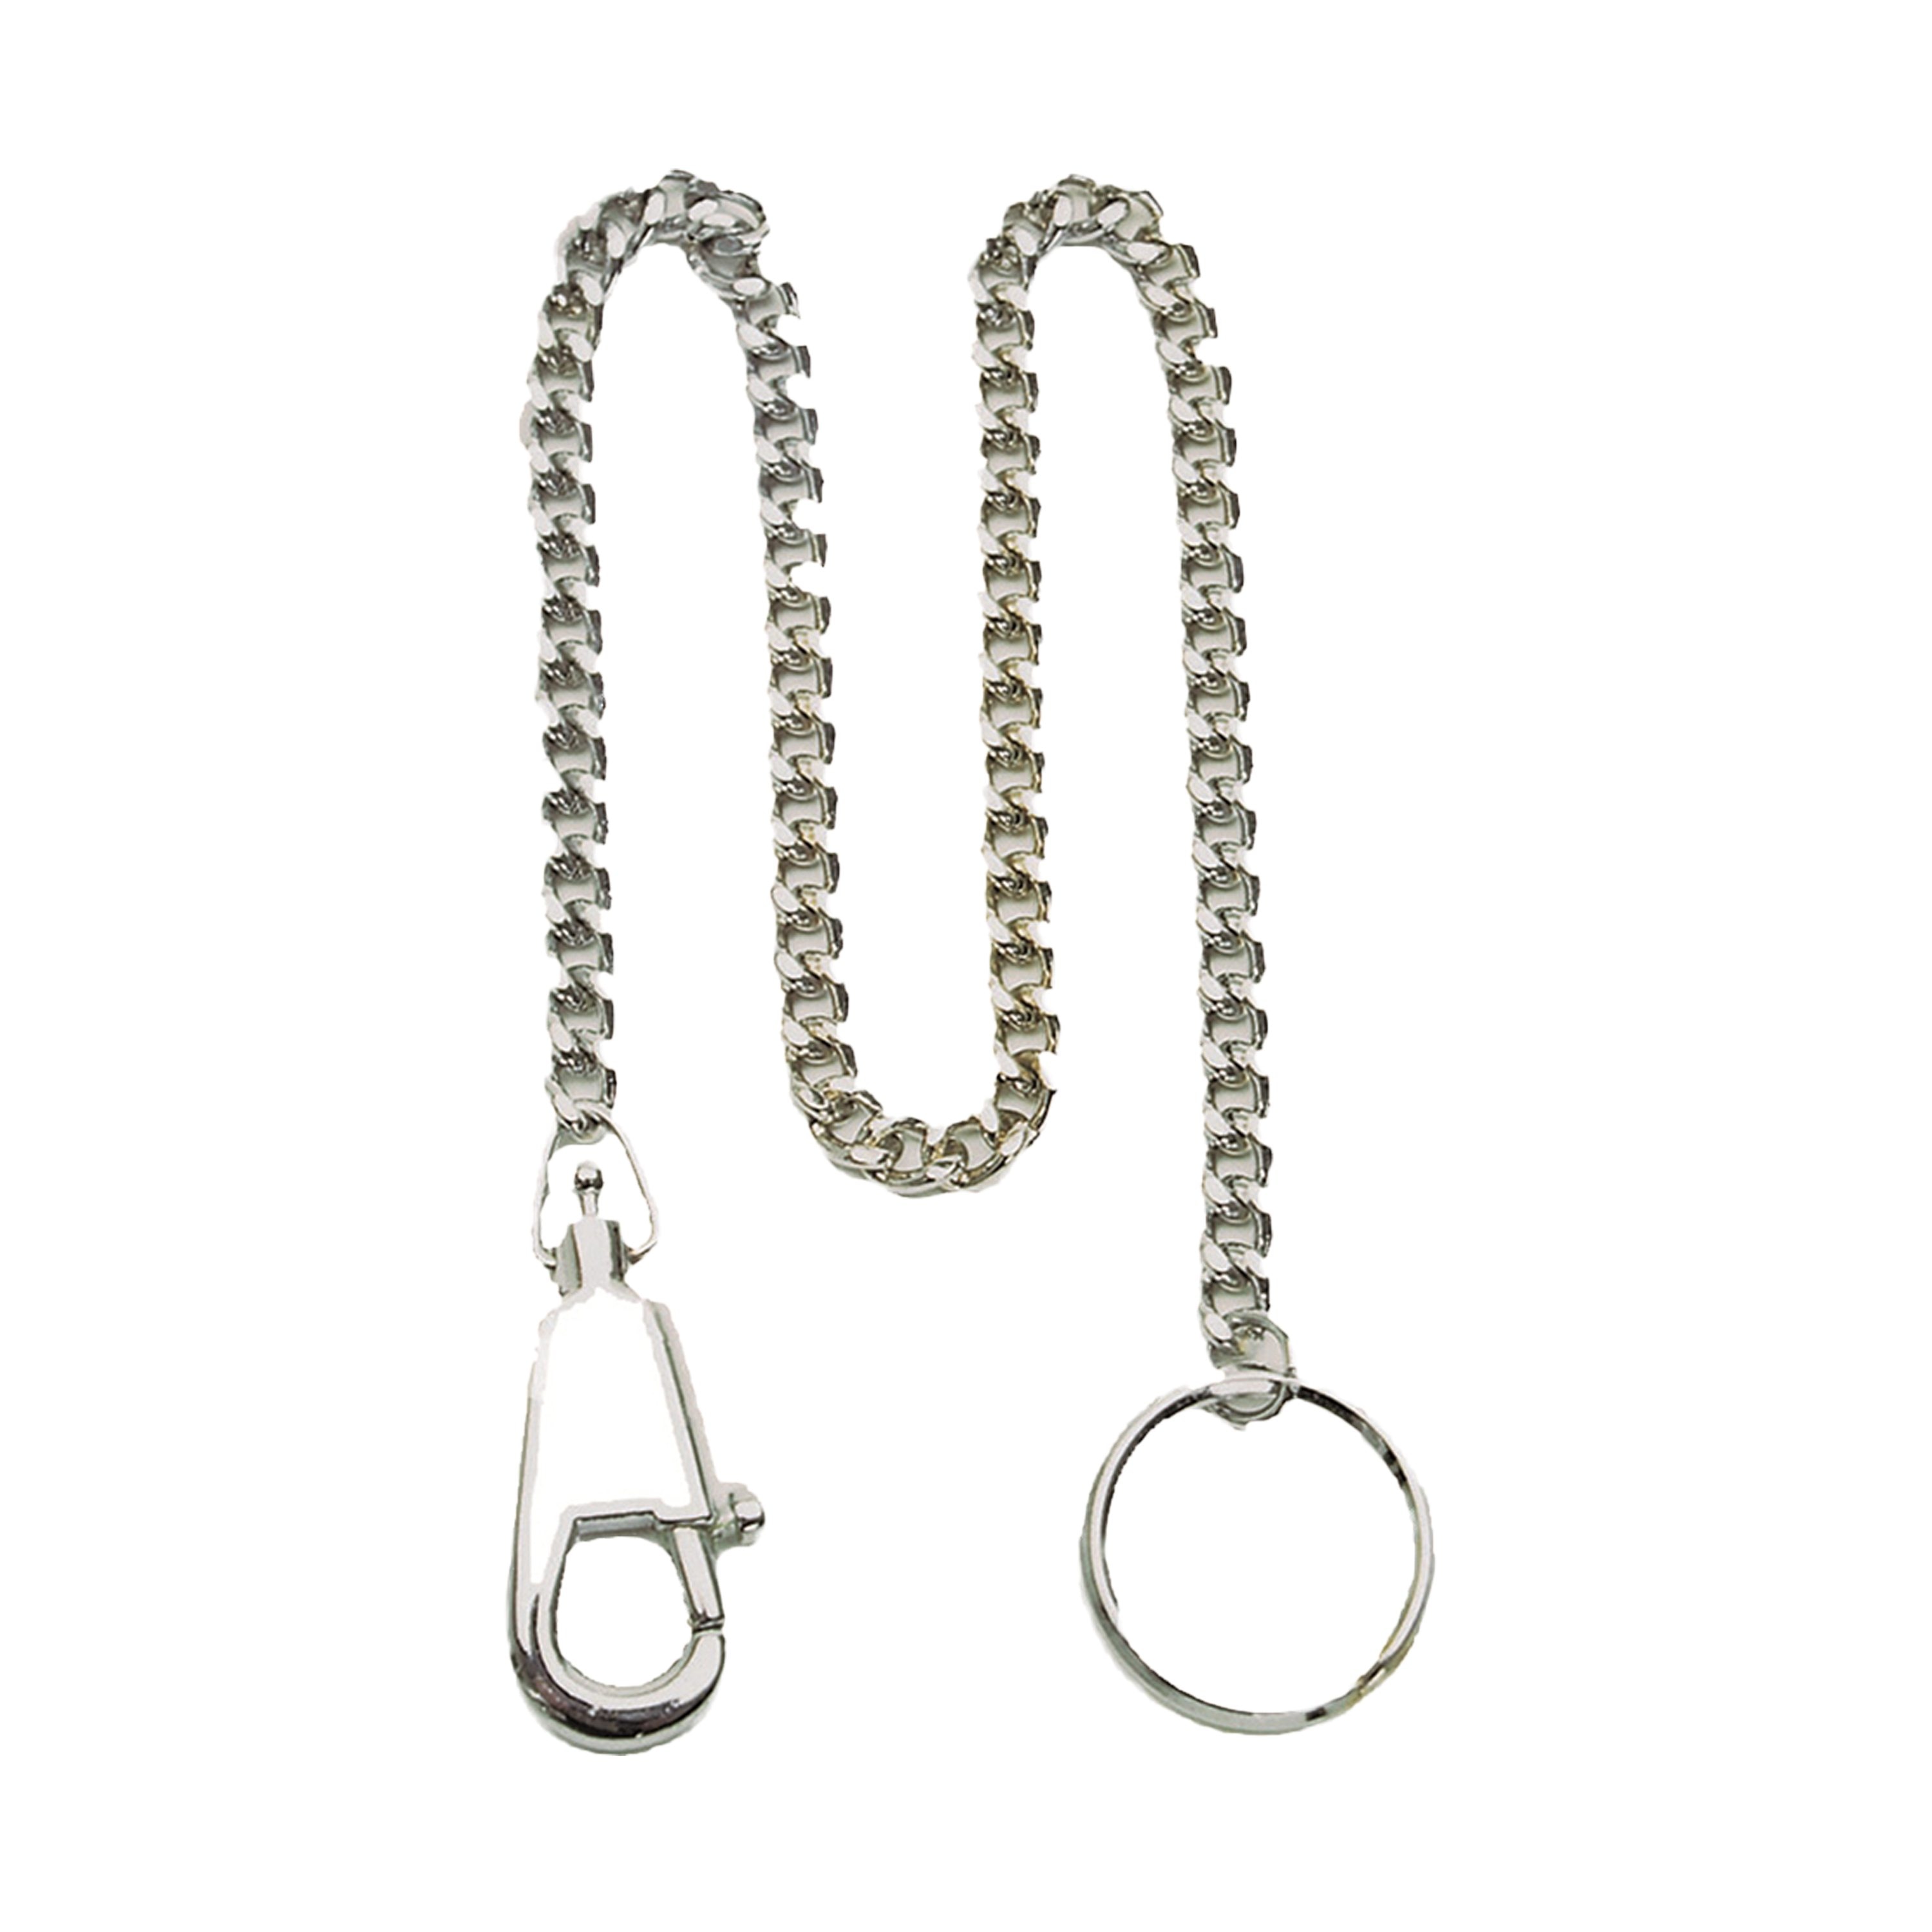 Knife Chain Nickel Plated with Carabiner | Knife Chain Nickel Plated ...